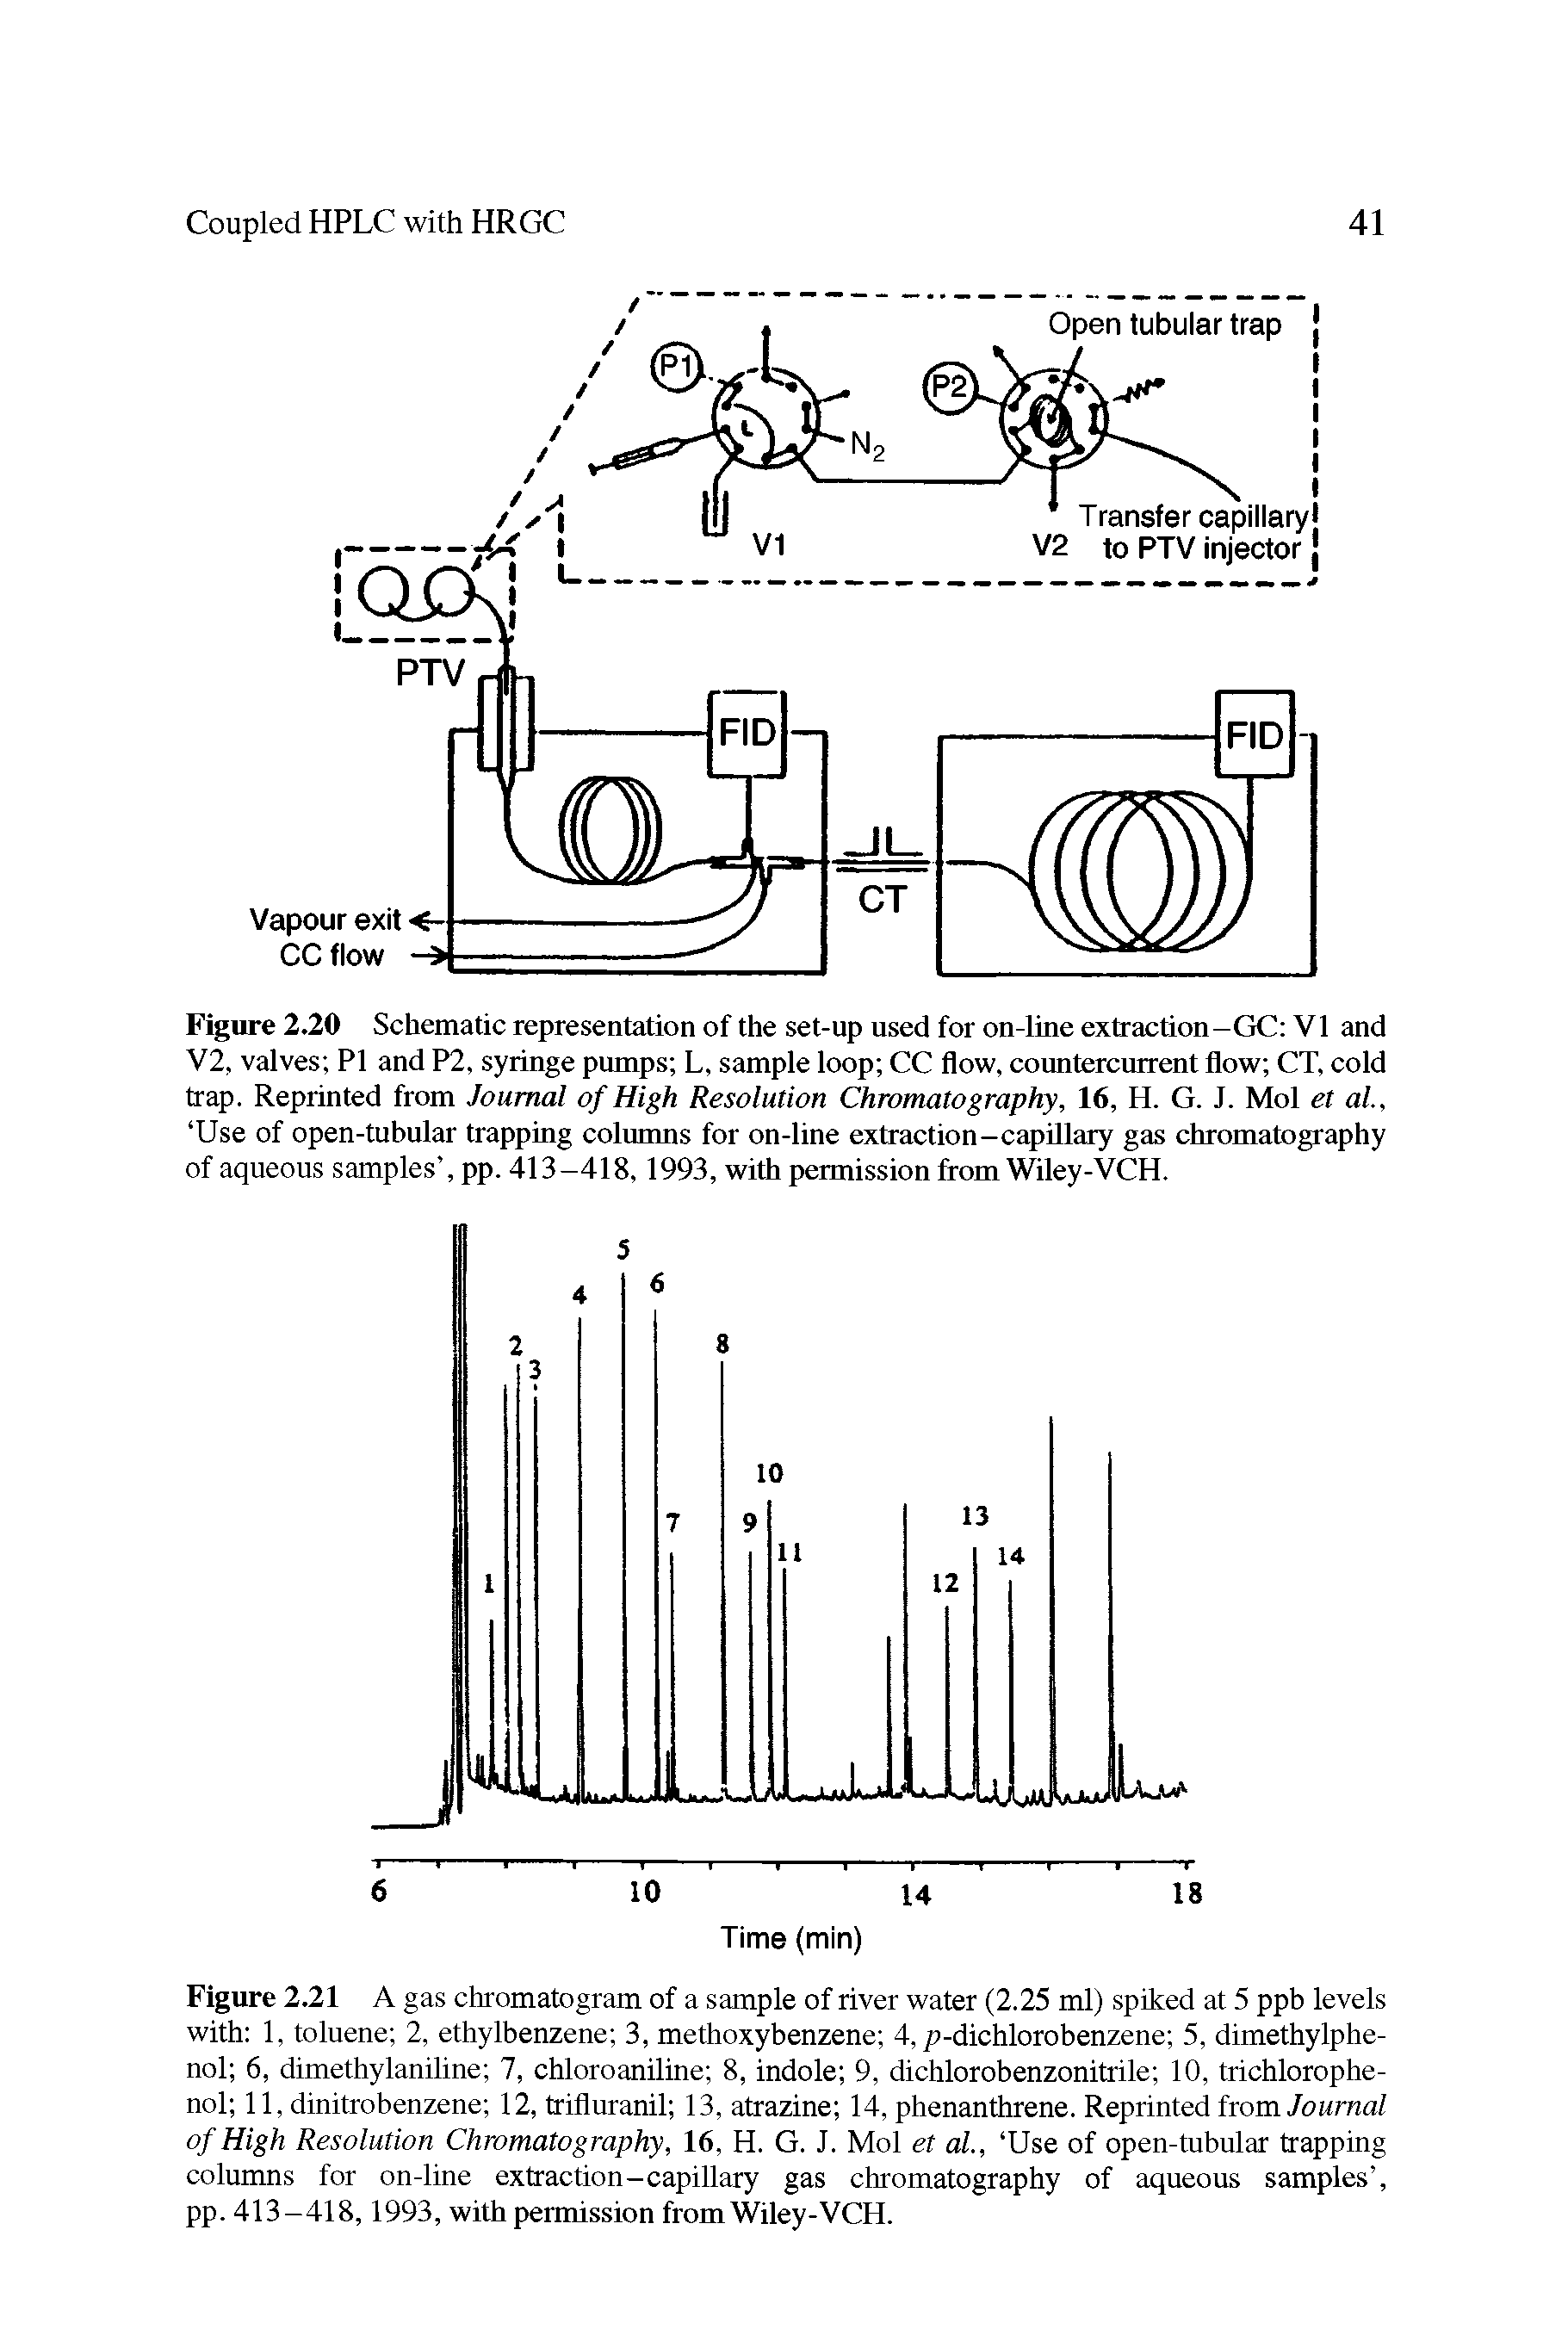 Figure 2.21 A gas chromatogram of a sample of river water (2.25 ml) spiked at 5 ppb levels with 1, toluene 2, ethylbenzene 3, methoxybenzene 4, p-dichlorobenzene 5, dimethylphe-nol 6, dimethylaniline 7, chloroaniline 8, indole 9, dichlorobenzonitrile 10, trichlorophe-nol 11, dinitrobenzene 12, trifluranil 13, atrazine 14, phenanthrene. Reprinted from Journal of High Resolution Chromatography, 16, H. G. J. Mol et al., Use of open-tubular trapping columns for on-line extraction-capillary gas chromatography of aqueous samples , pp. 413-418,1993, with permission from Wiley-VCH.